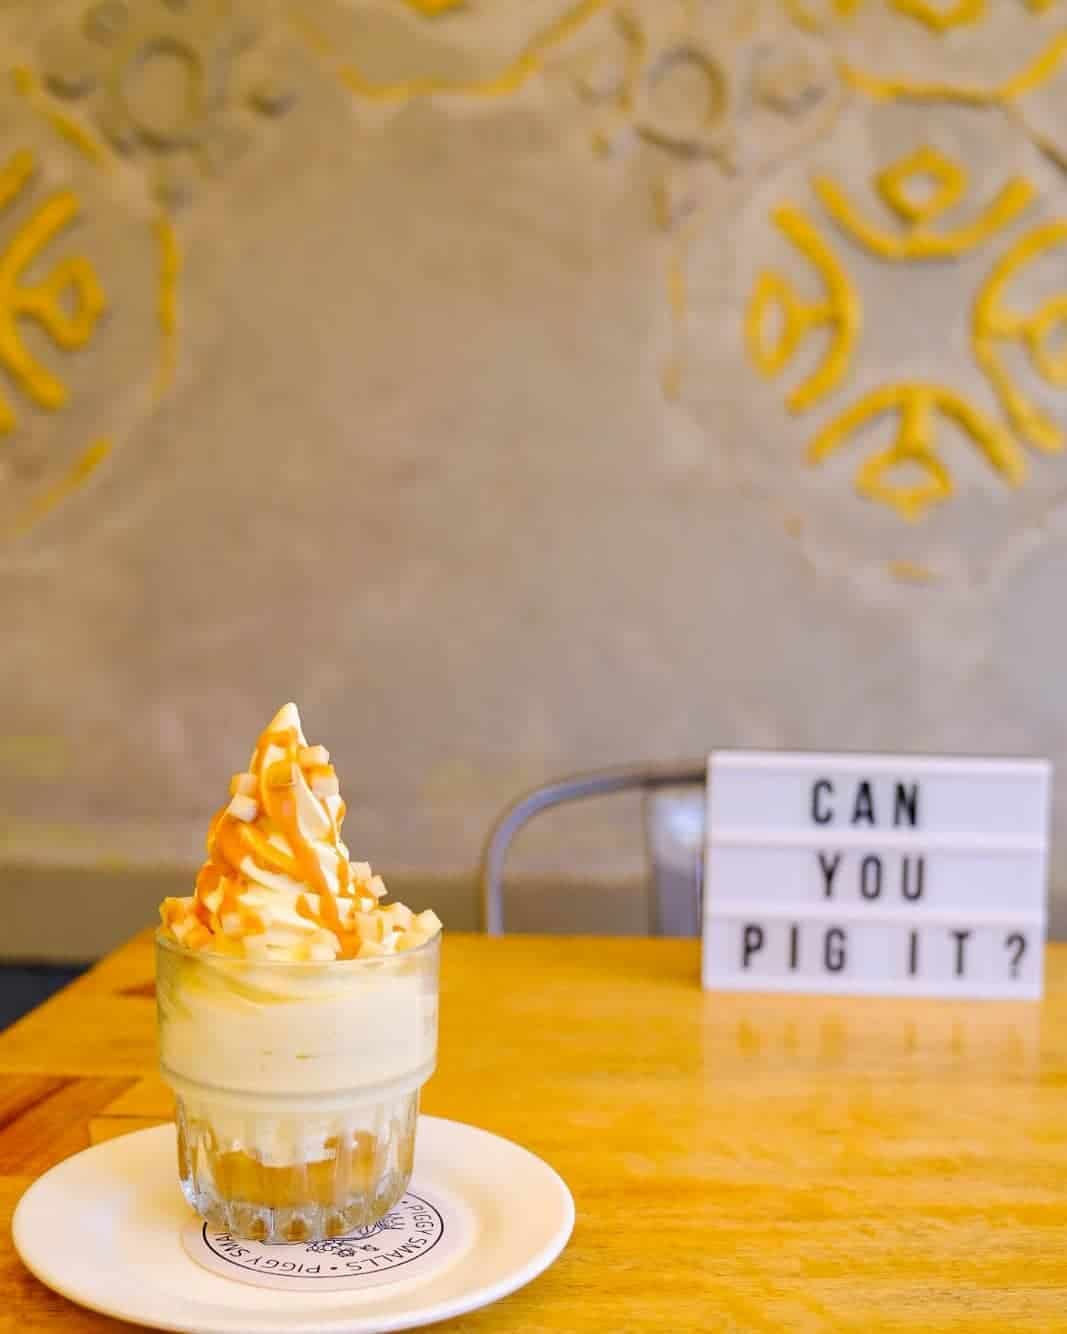 Congratulations to Piggy Smalls who recently celebrated their 5 year anniversary! If you haven't been yet, you can dine in or take out, and make sure you try their unique soft serve flavor combinations.